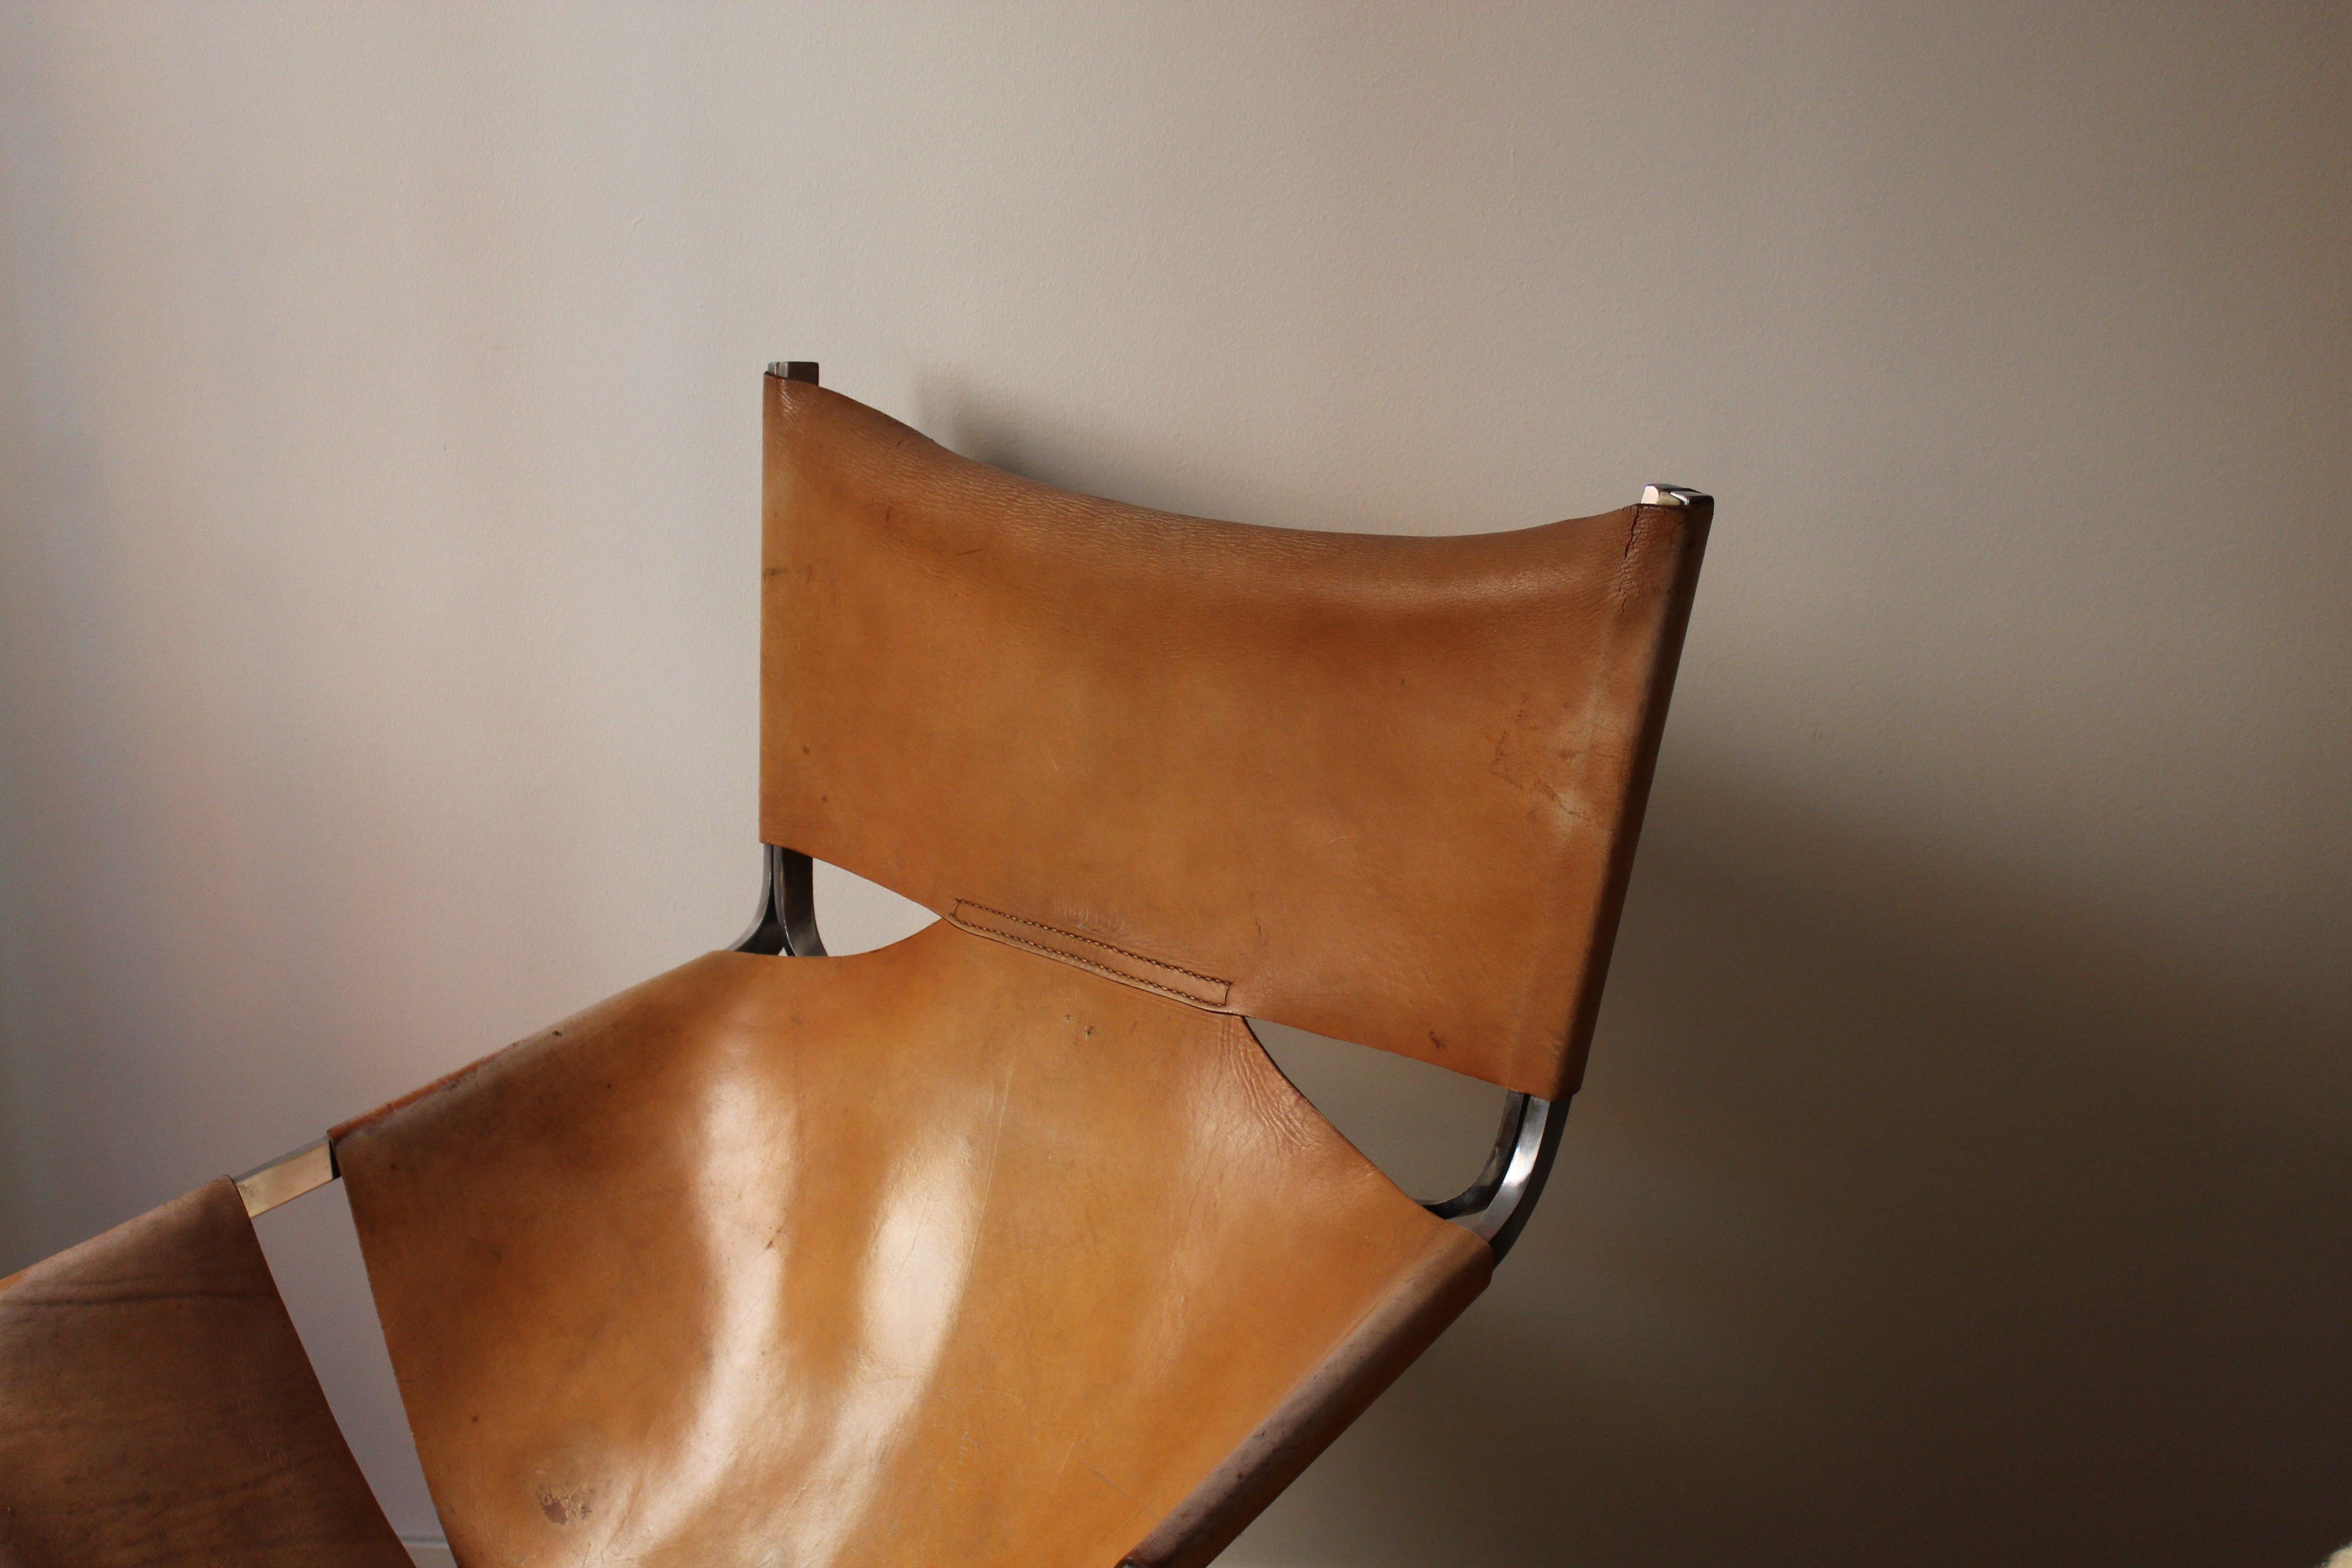 A lounge chair by Pierre Paulin for Artifort. Designed in 1963, produced in the 1960s. Features its original leather with dramatic patina.